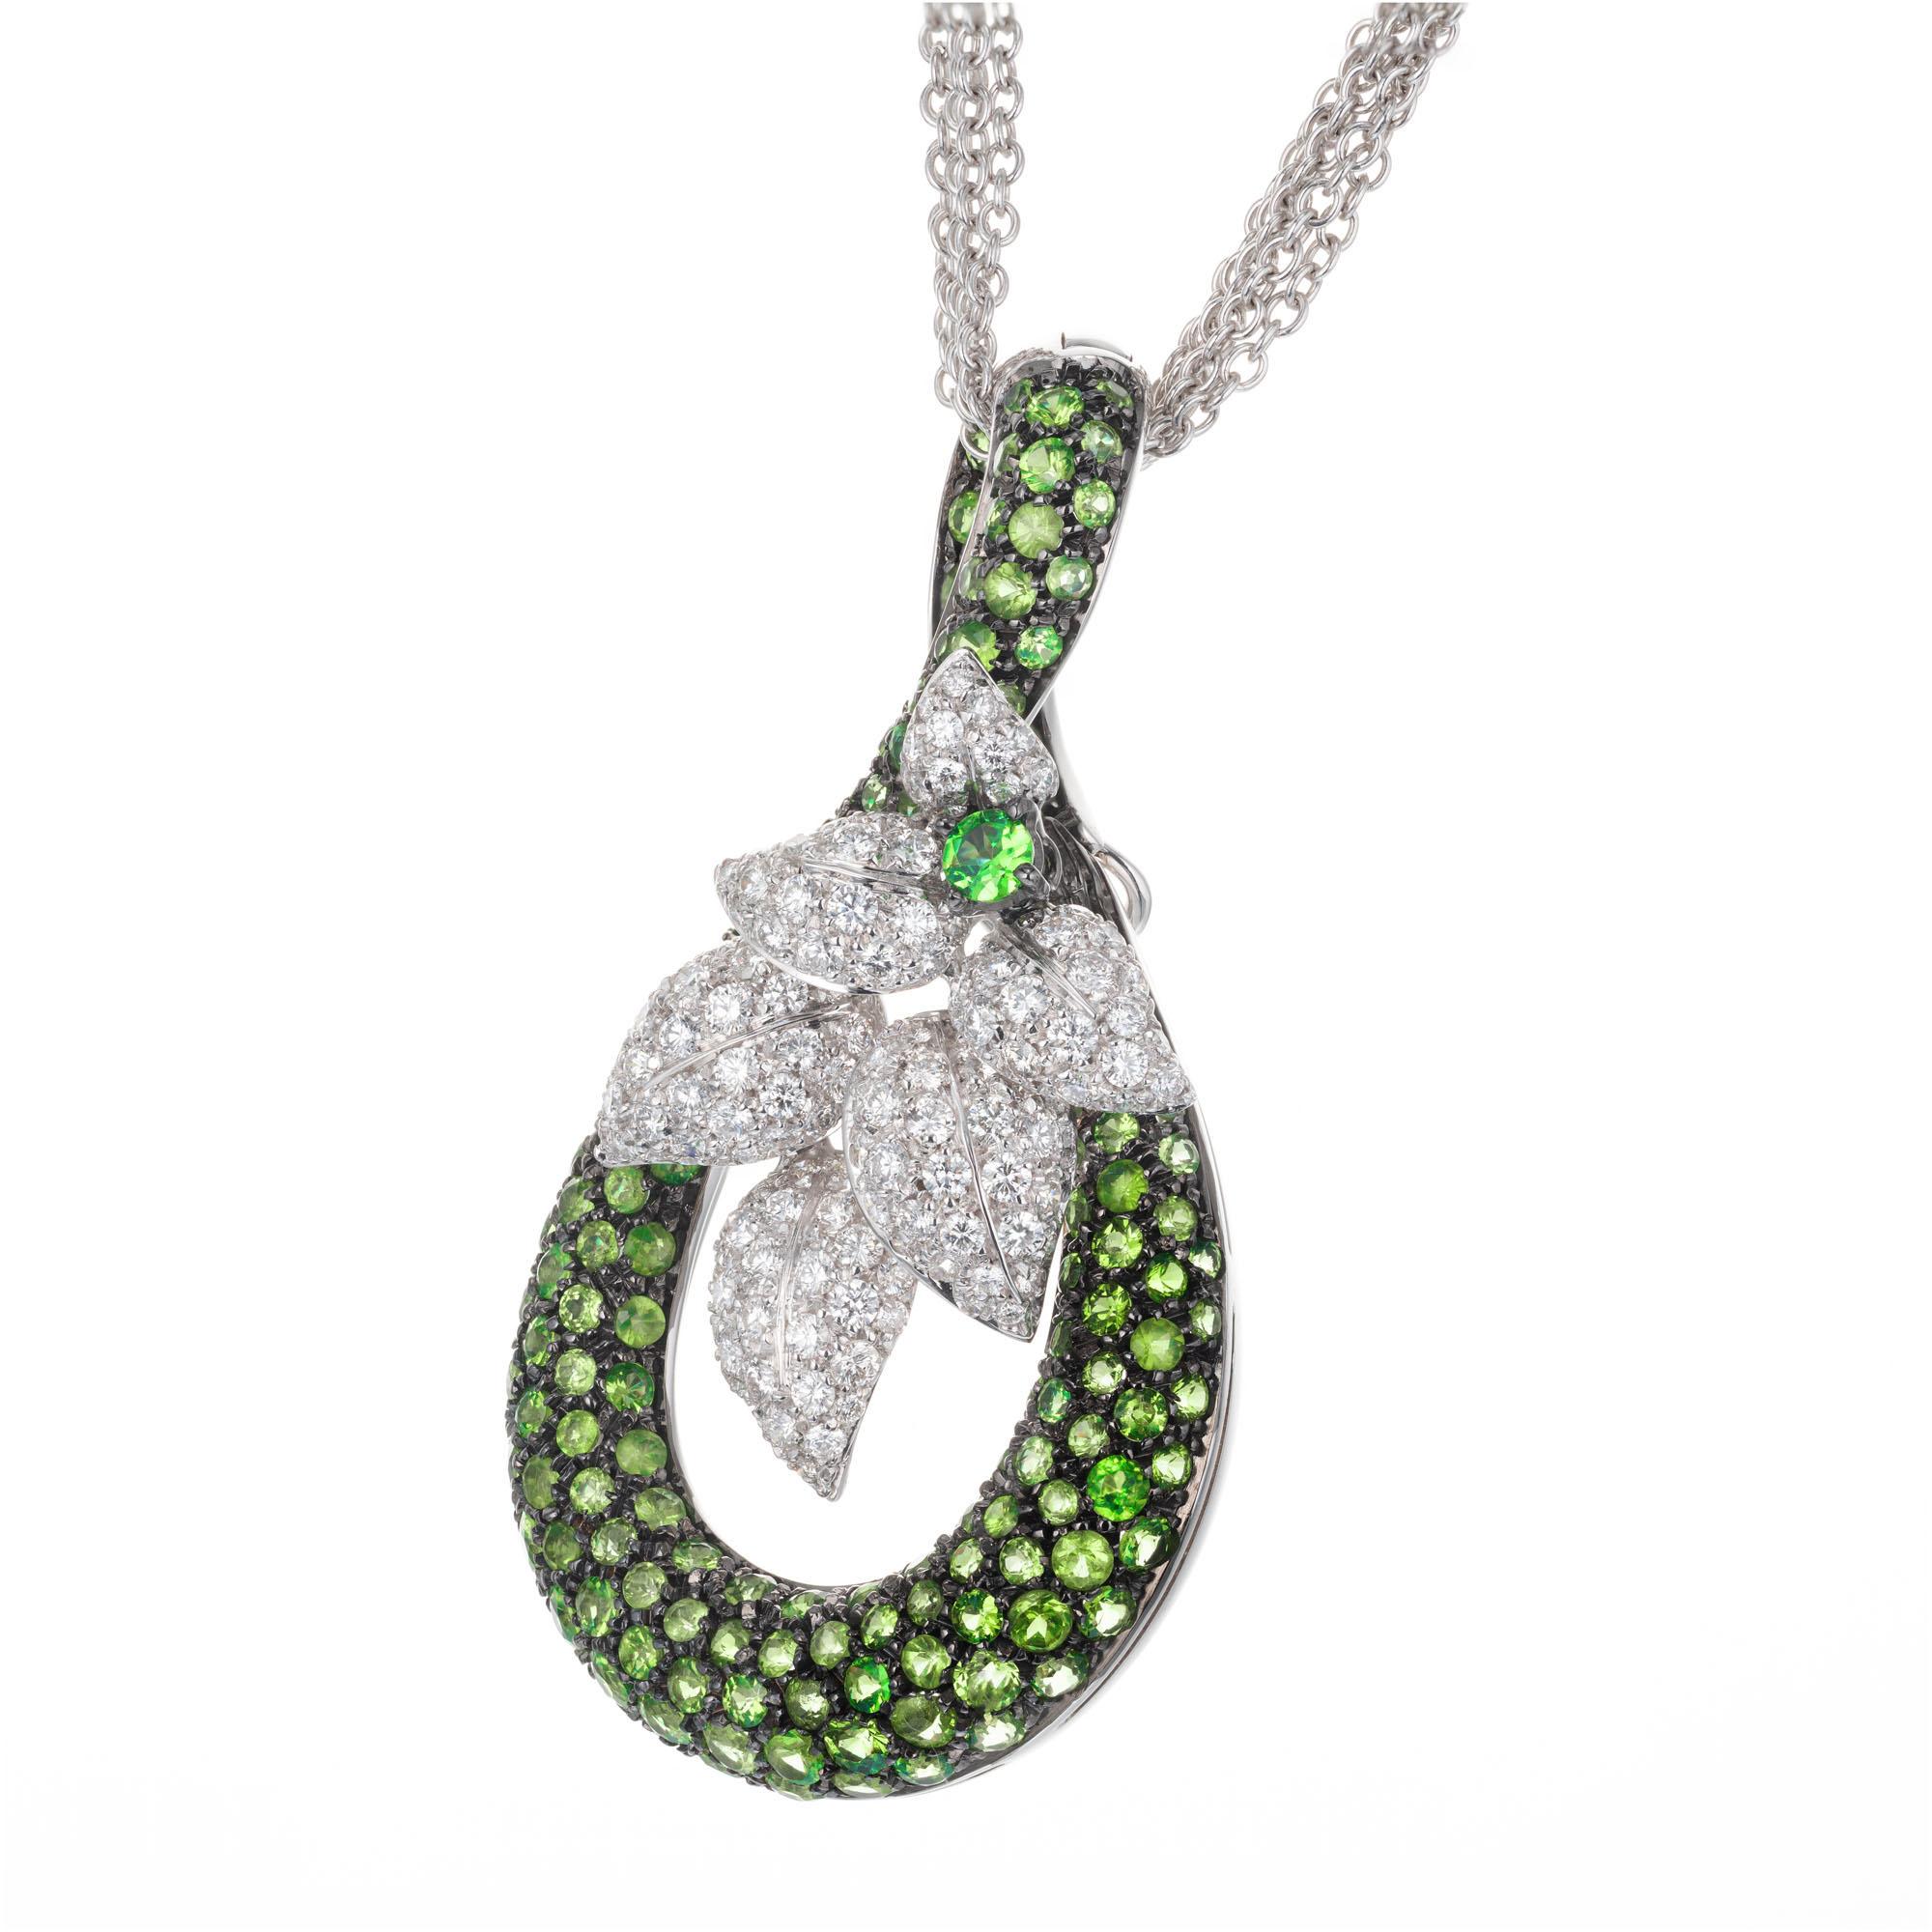 Swirl and flower design tsavorite garnet and diamond pendant enhancer necklace. 18k white gold multi strand necklace. 

155 green tsavorite garnet MI, approx. 4.00cts
136 round brilliant cut diamonds G VS-SI, approx. 2.35cts
18k white gold 
Stamped: